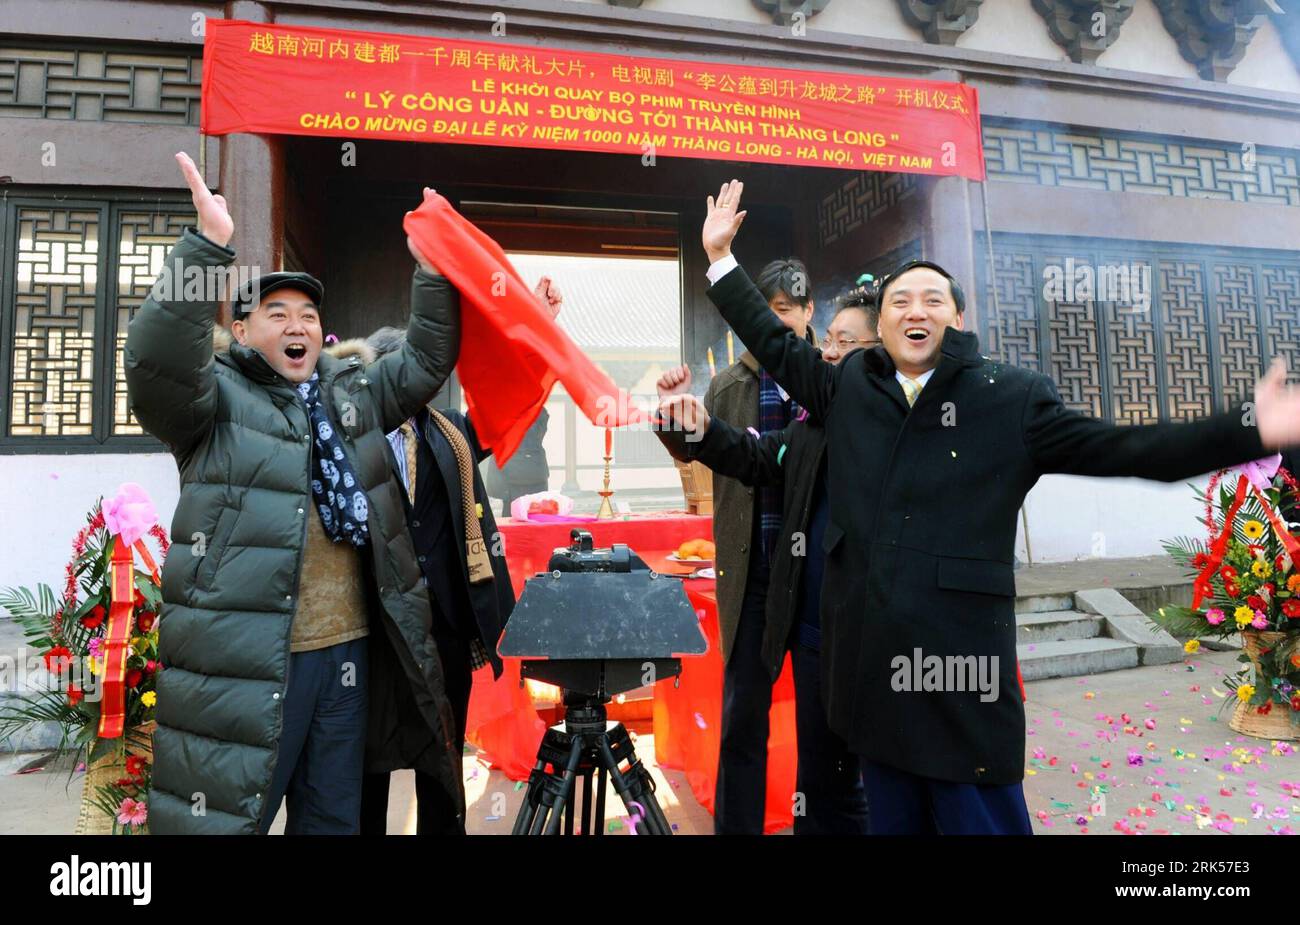 Bildnummer: 53714676  Datum: 09.01.2010  Copyright: imago/Xinhua (100109) -- HENGDIAN(ZHEJIANG), Jan. 9, 2010 (Xinhua) -- General director Jin Demao (L, Front) and Chairman of Eastern Allies Satellite Television Development Group Limited Du Fangning (R, Front) unveil the red cloth on a cine-camera at the opening ceremony of a historical TV show Lu Cong Uan s way to Thang Long in Hengdian, east China s Zhejiang Province, Jan. 9, 2010. Invested by Eastern Allies Satellite Television Development Group Limited and themed at the life of Lu Cong Uan, founder of Ly dynasty in Vietnamese history, the Stock Photo